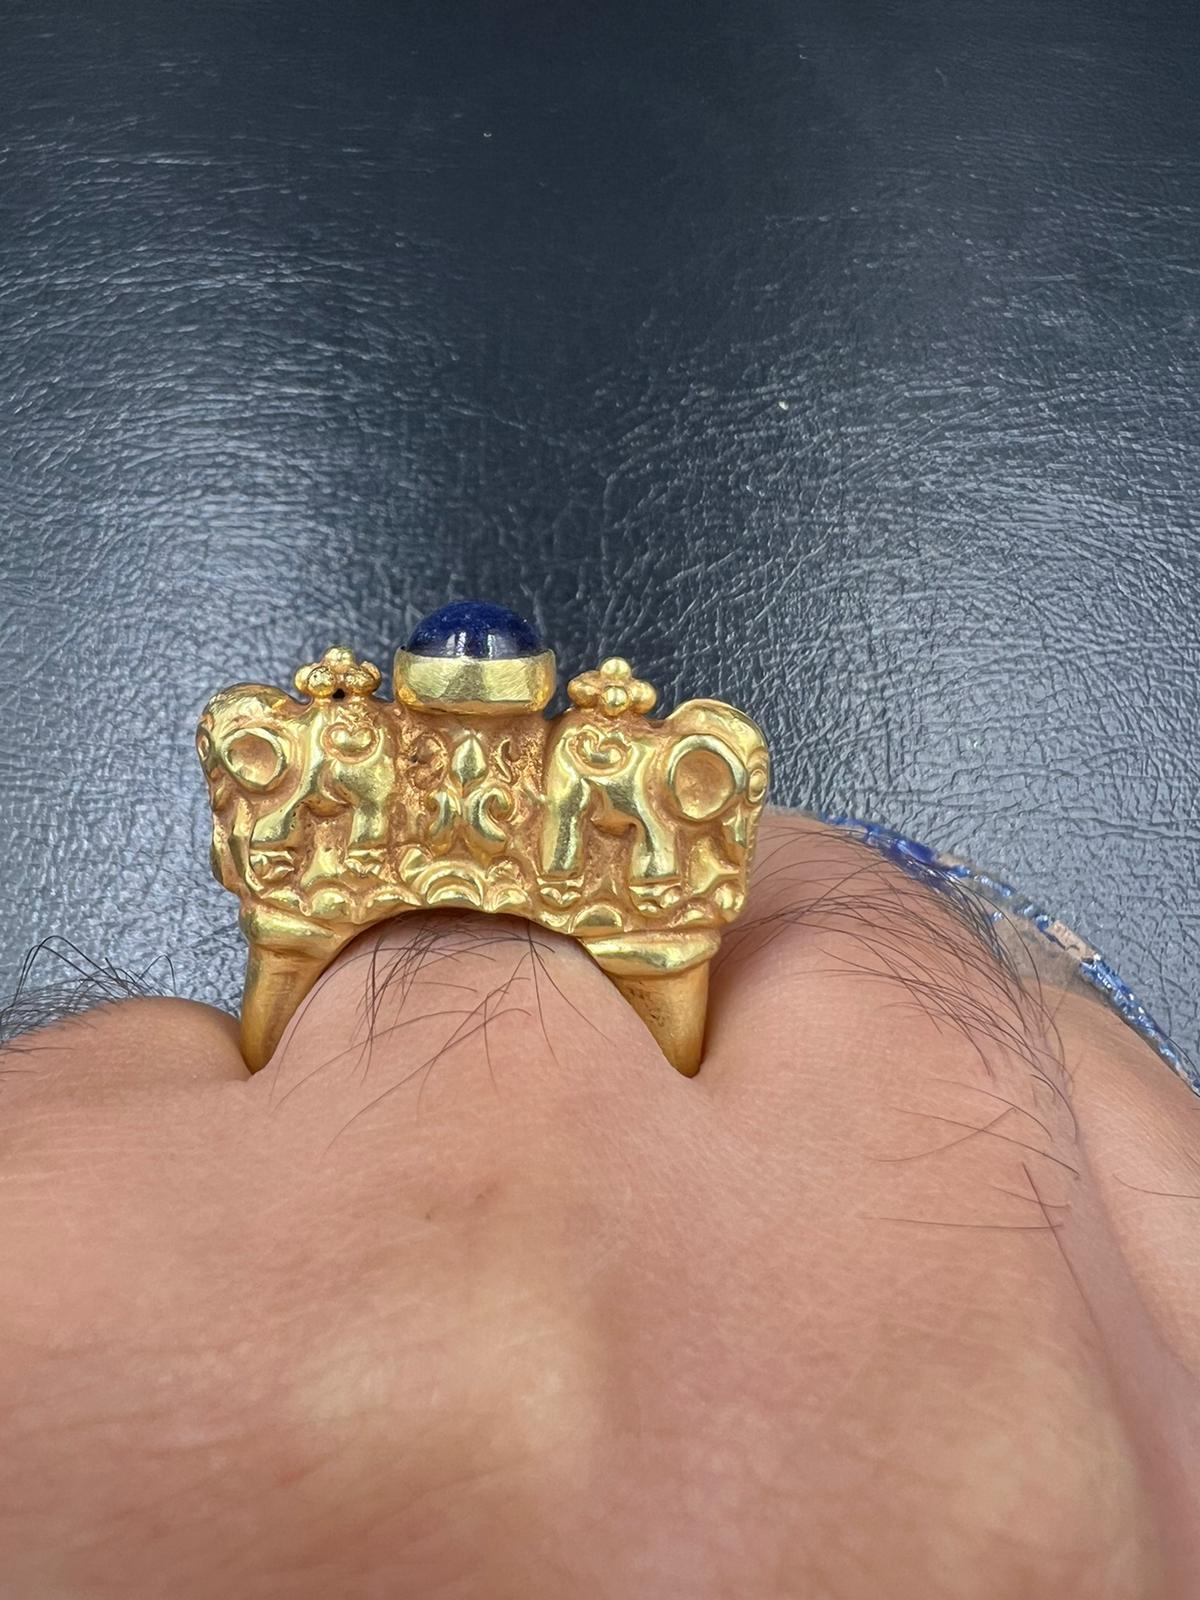 Cabochon Bochic Curated Antique Ring From Burma 18k Solid Gold & Antique Lapis Lazuli For Sale